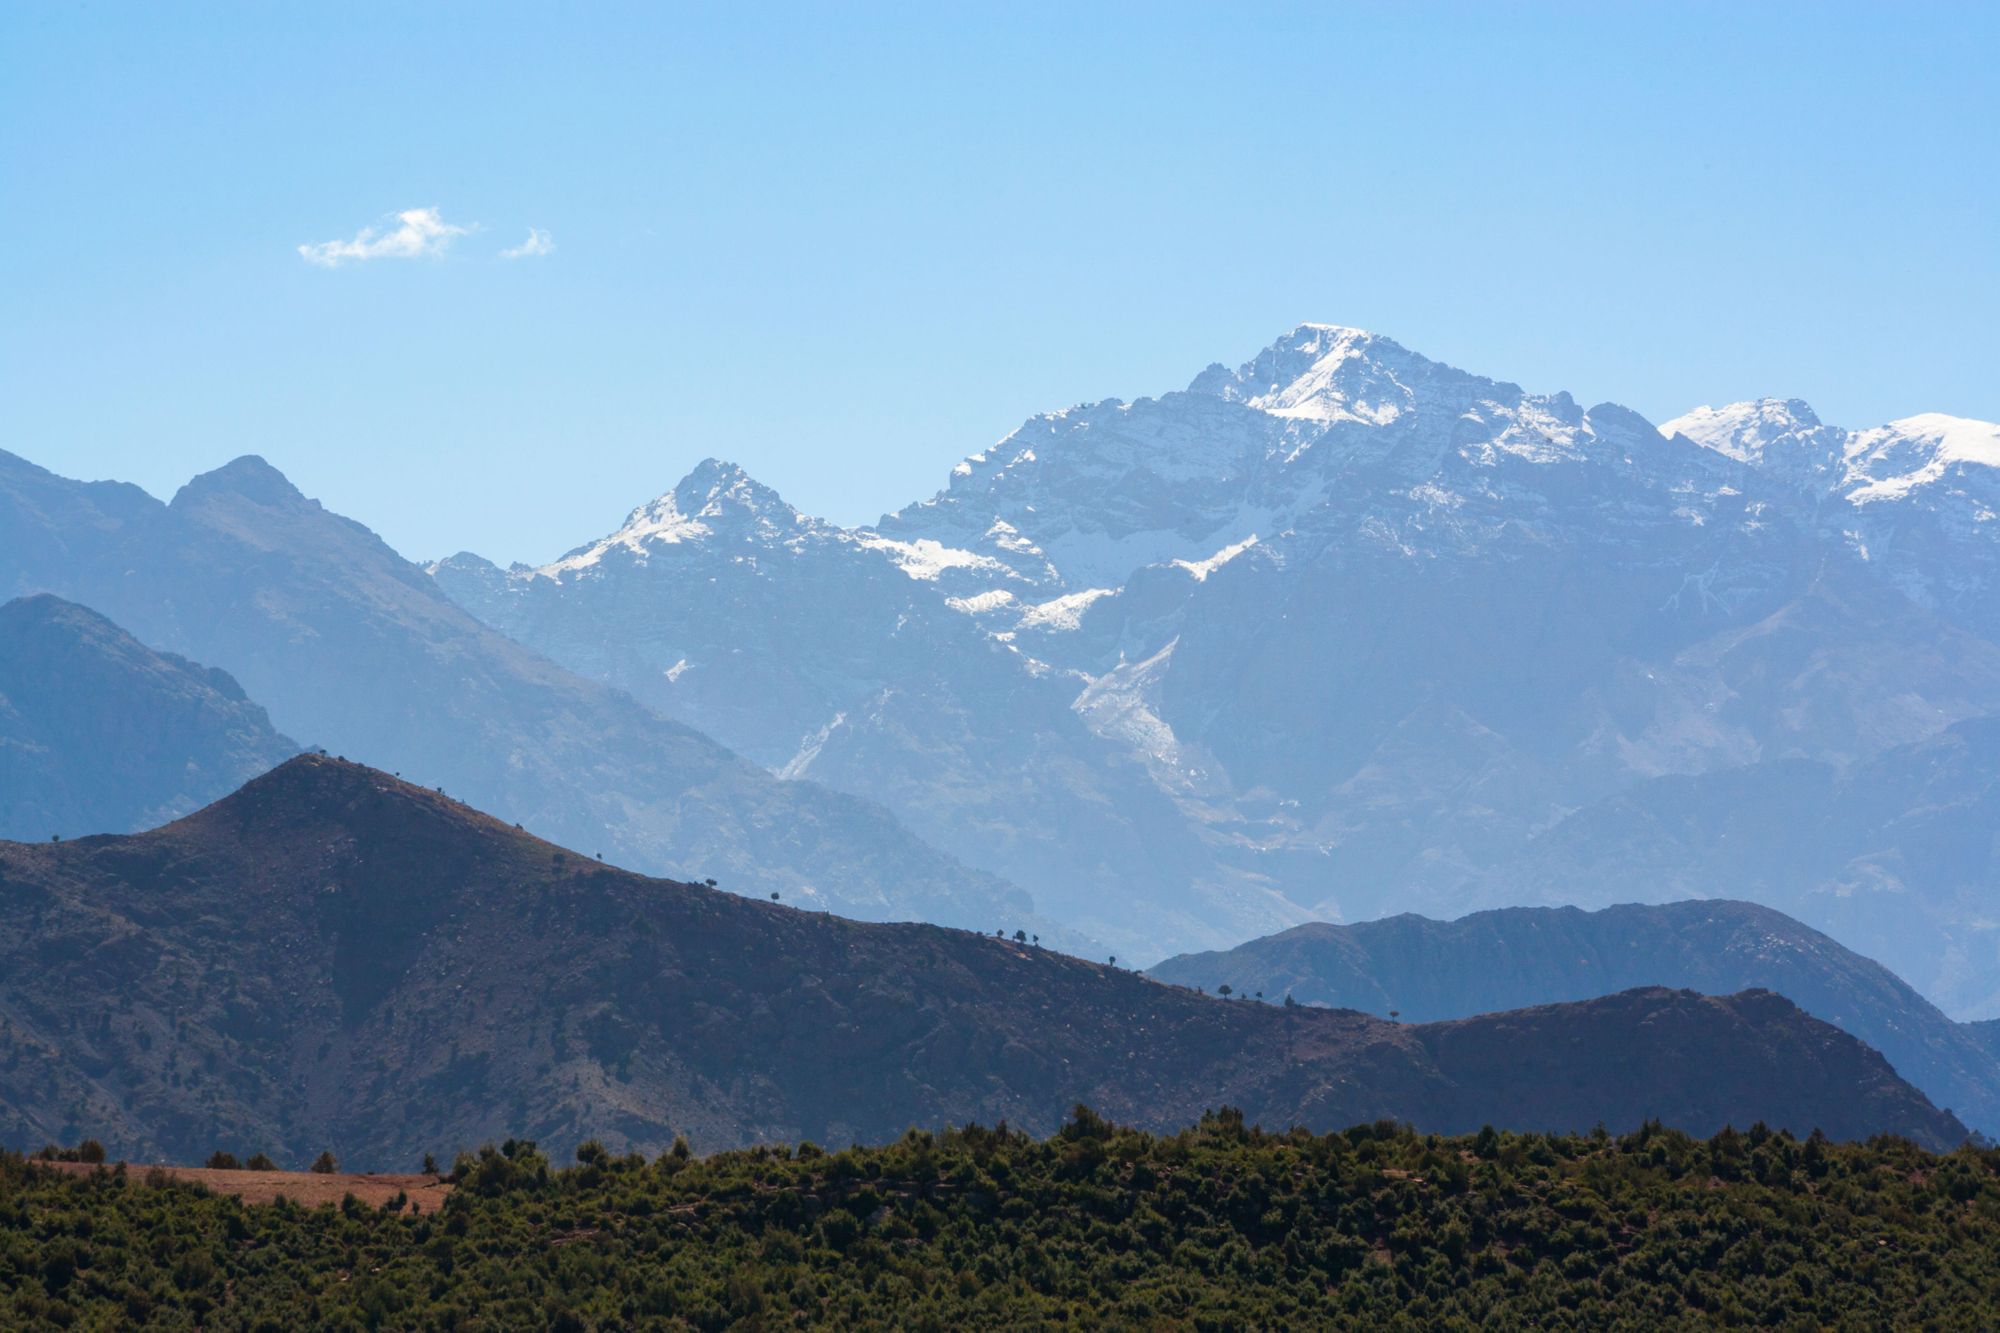 Mount Toubkal, also called Jebel Toubkal, in the High Atlas Mountains of Morocco. Photo: Getty